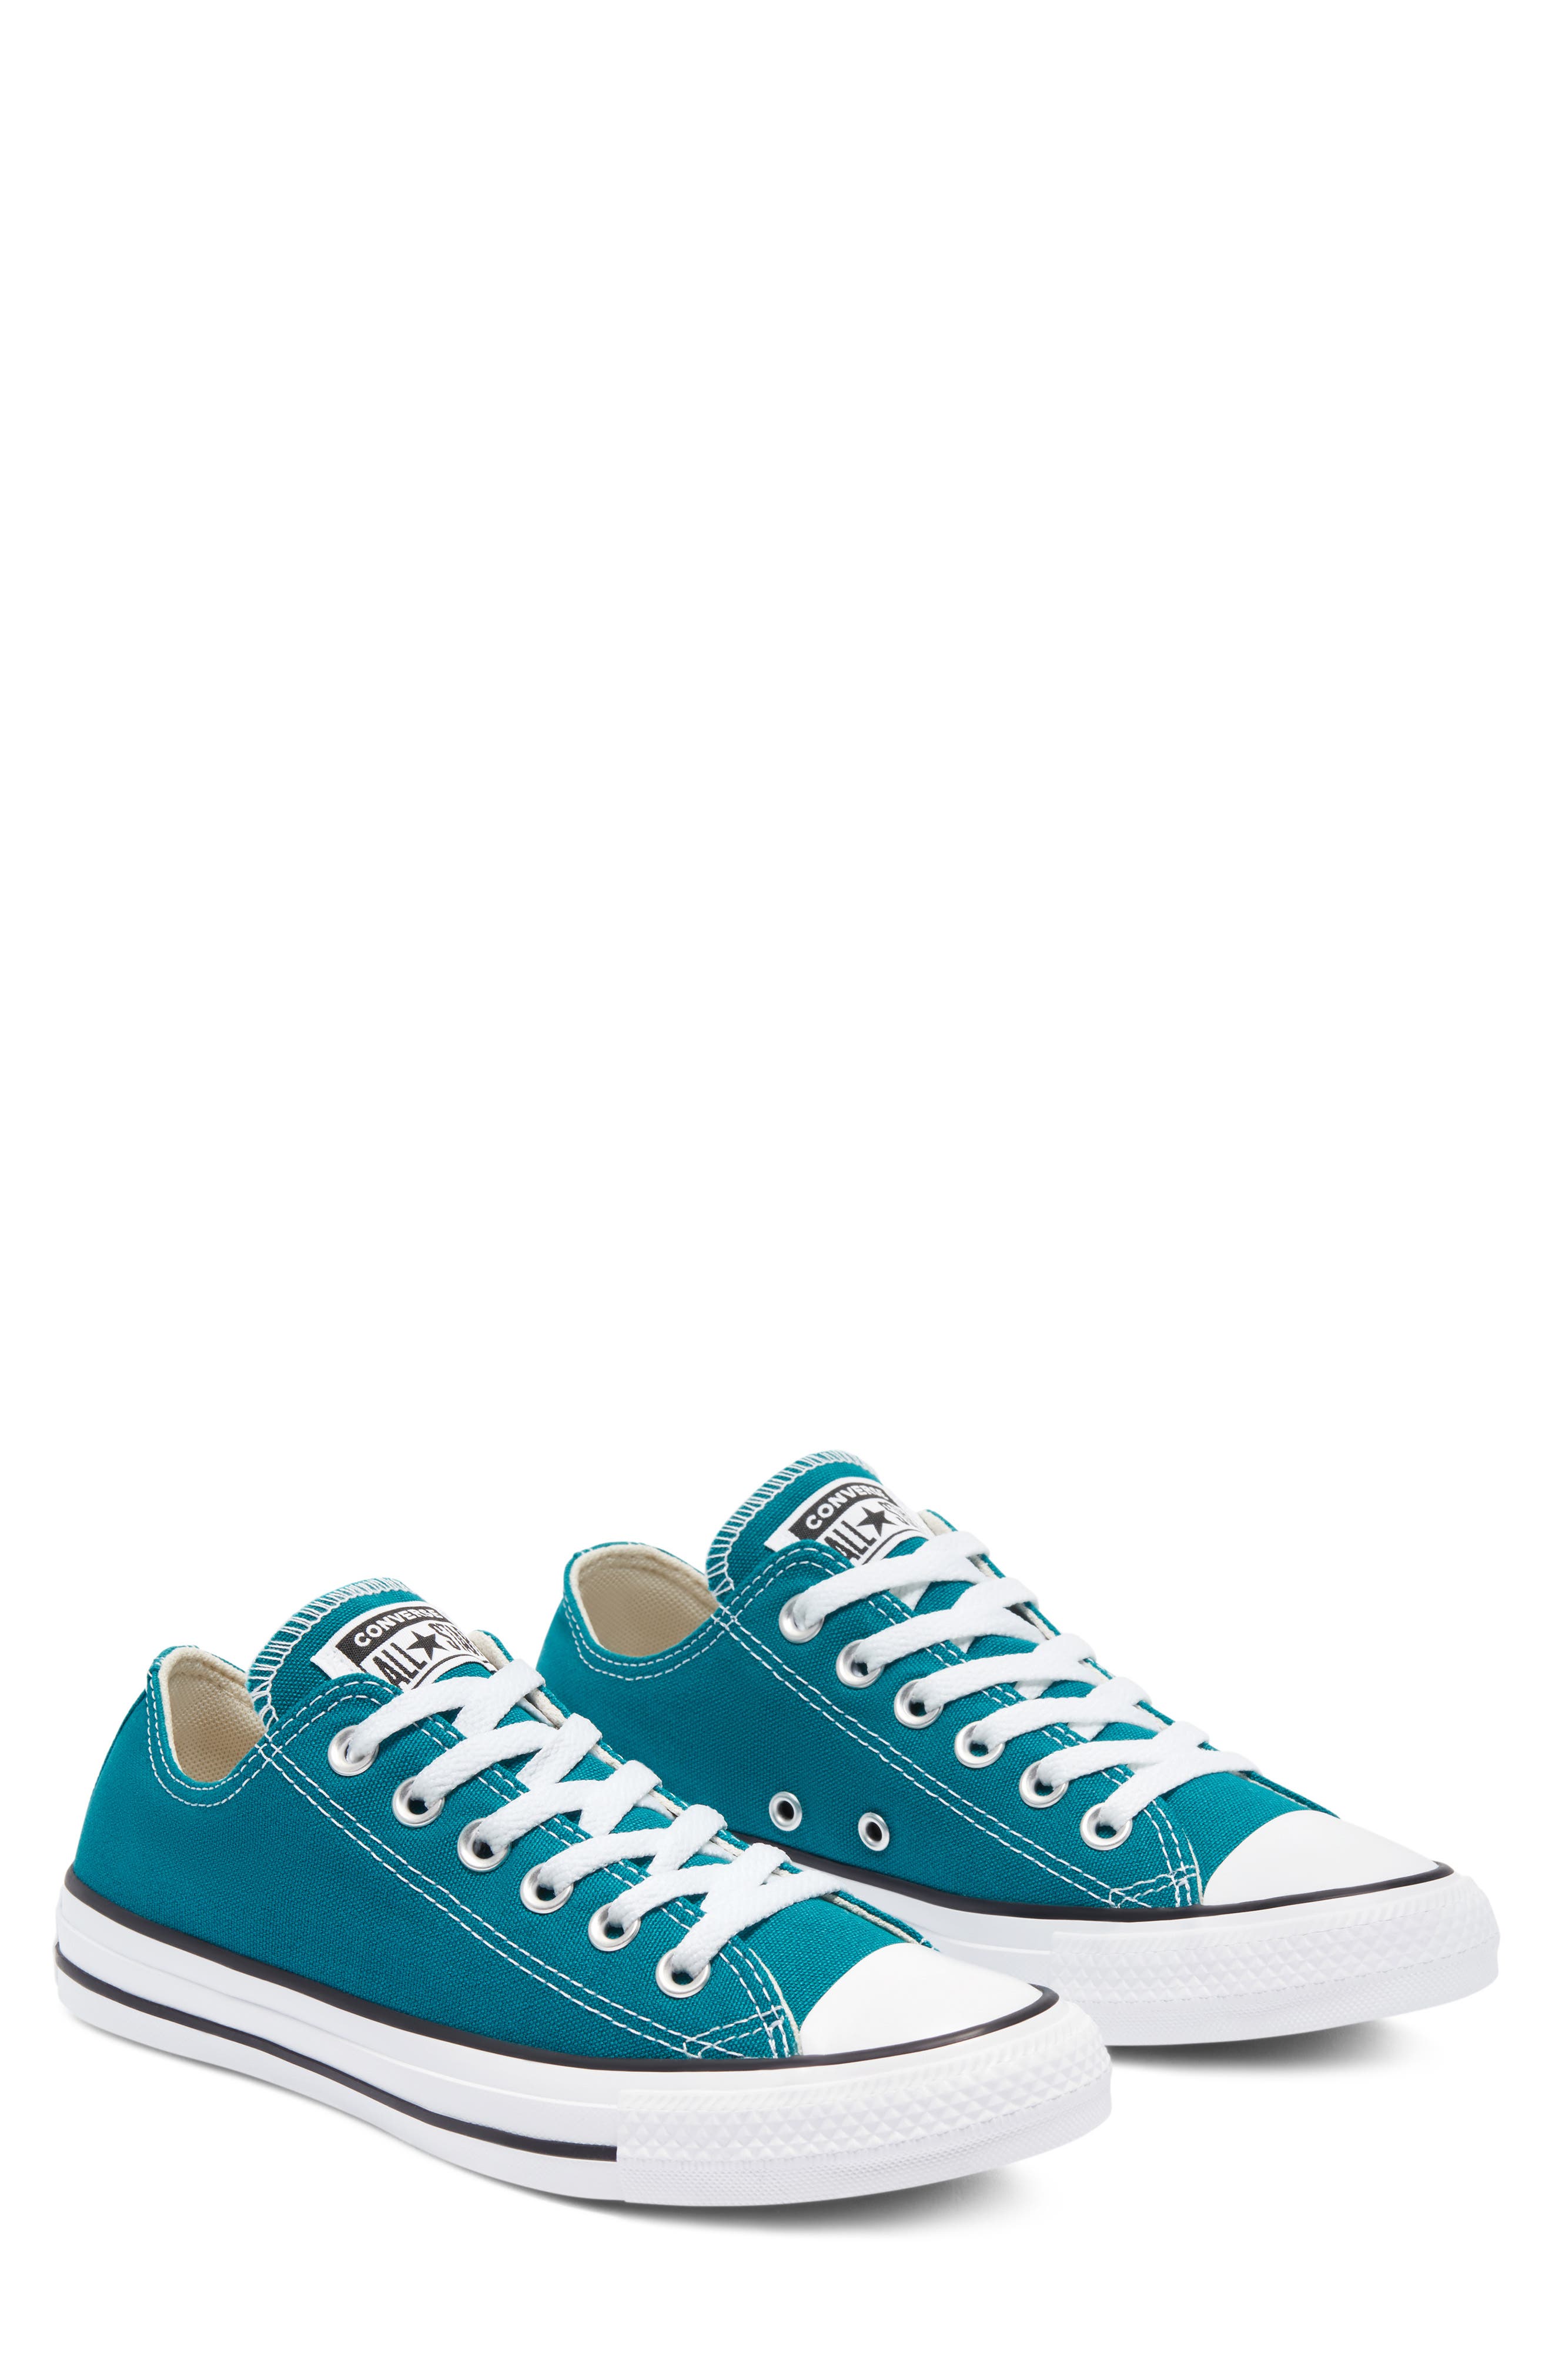 teal converse low tops